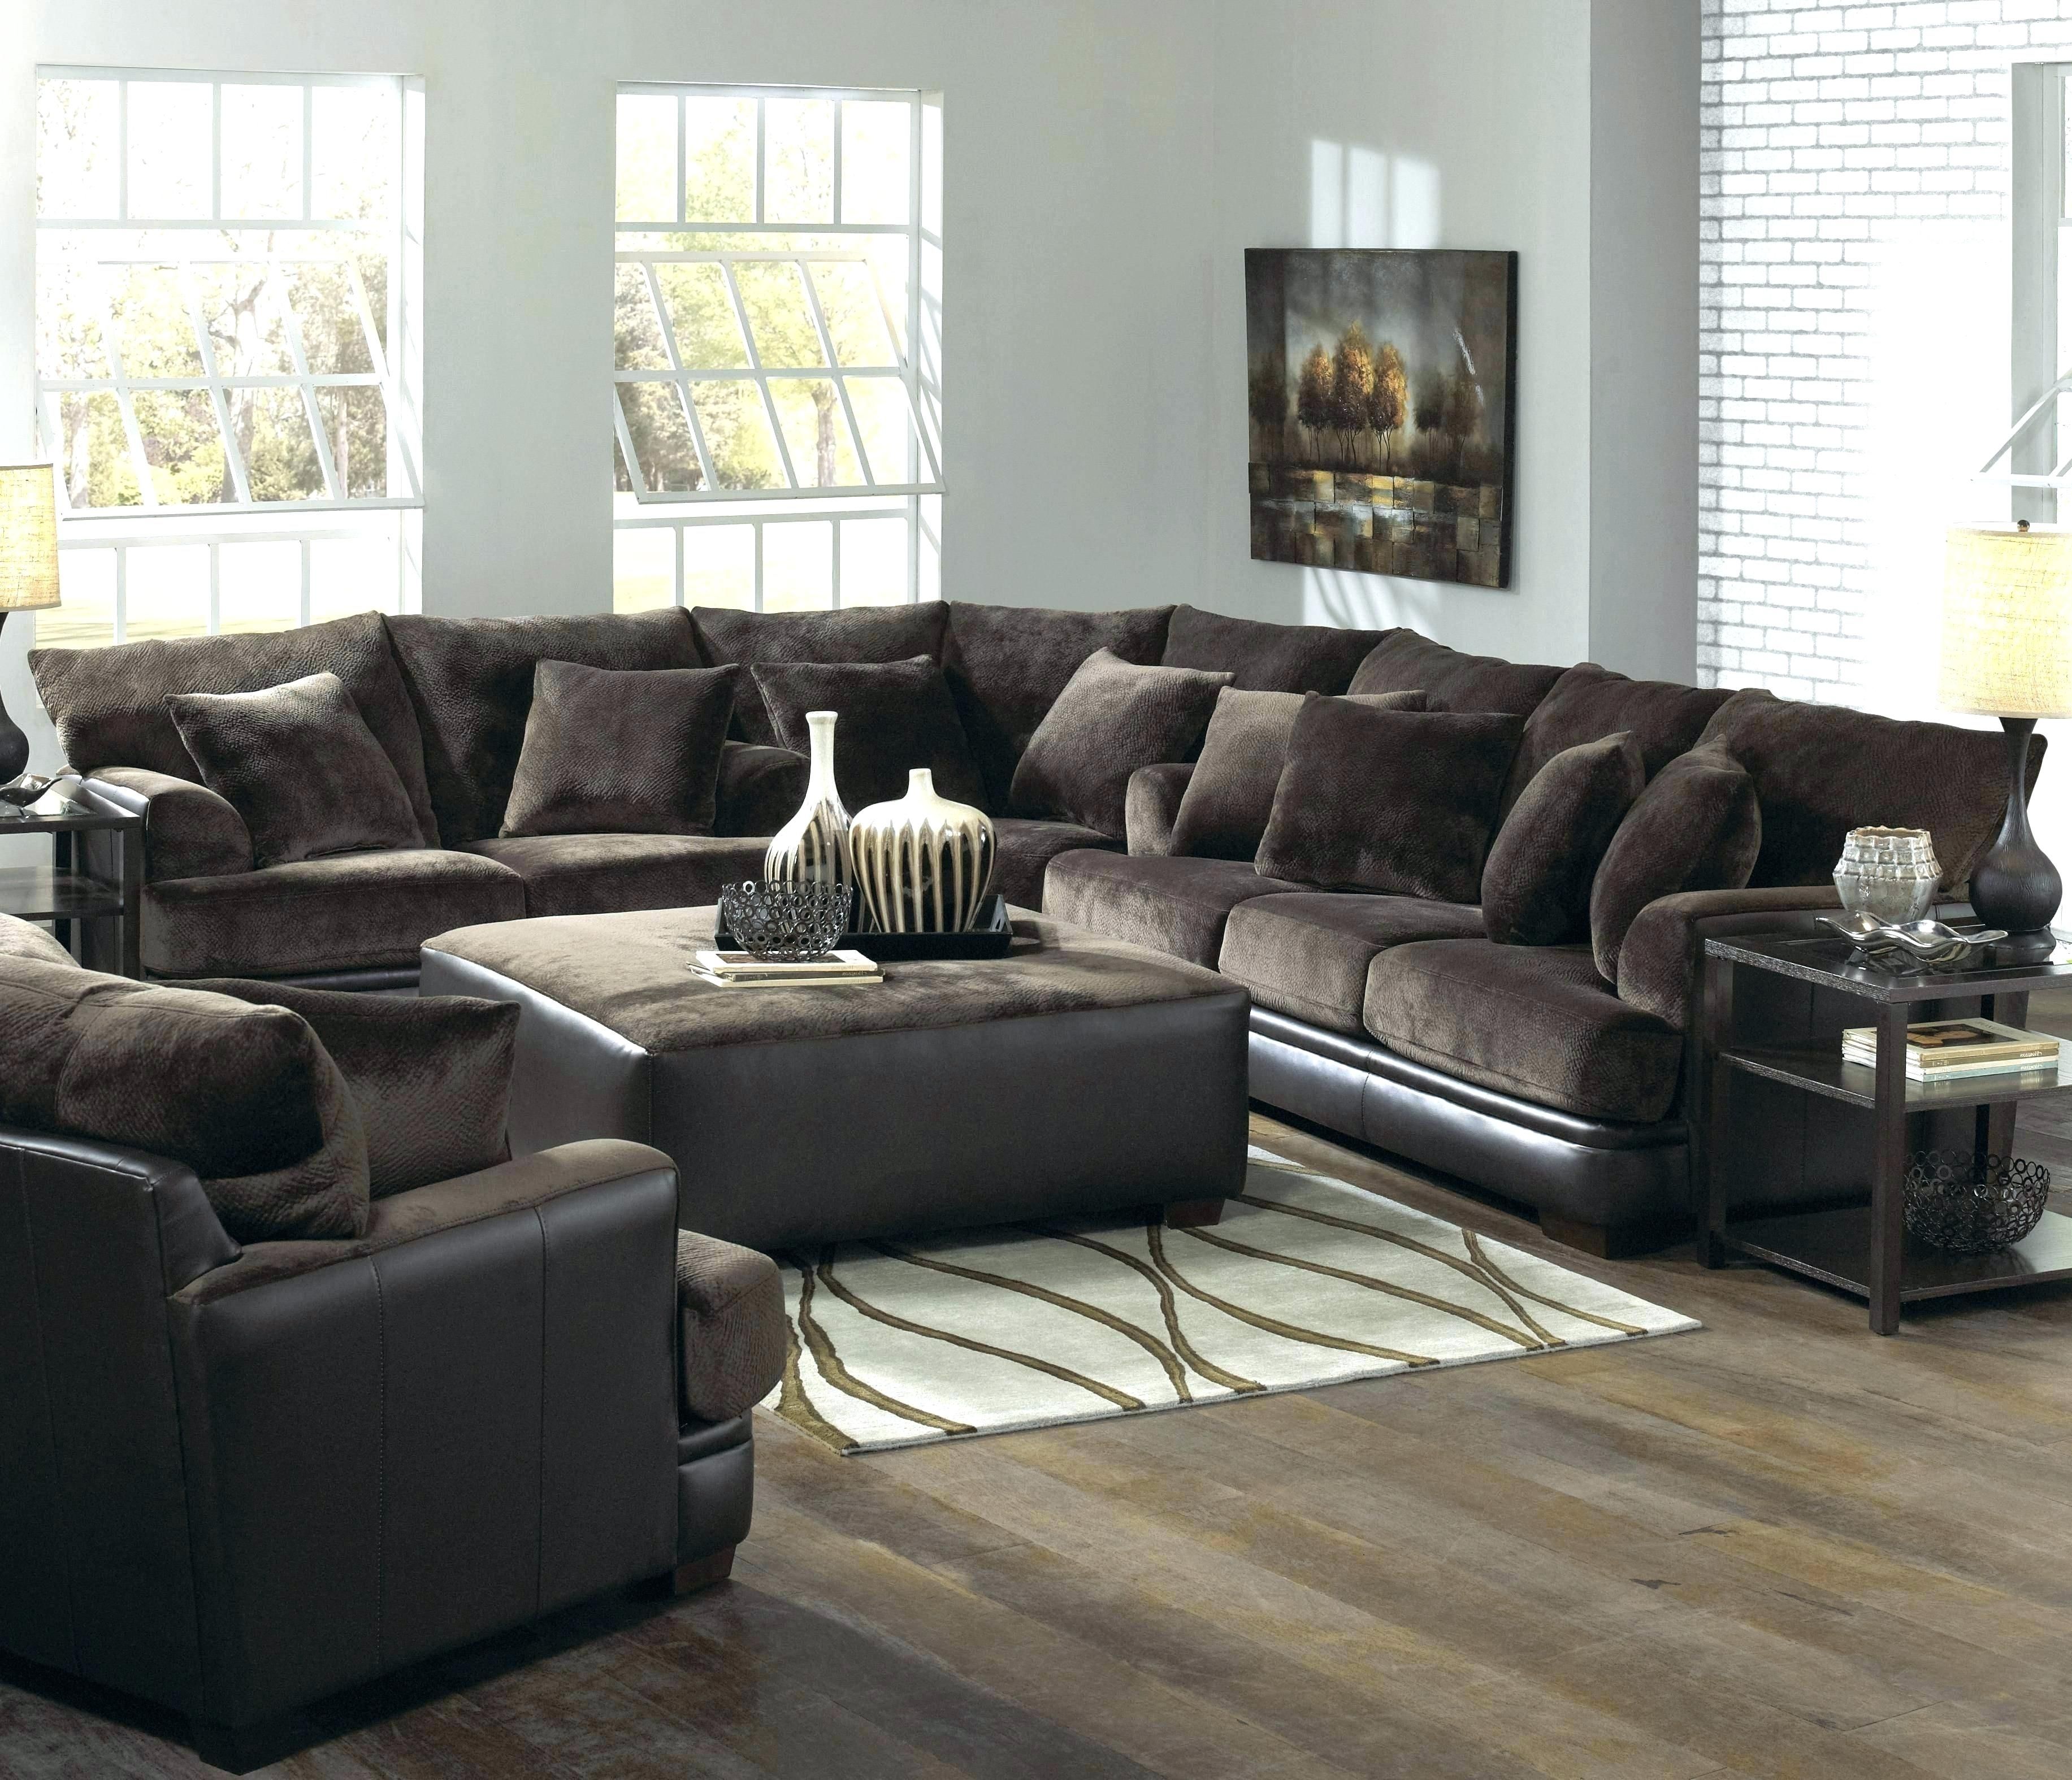 Sectional Sofas For Sale – Stepdesigns Inside Ottawa Sale Sectional Sofas (Photo 3 of 10)